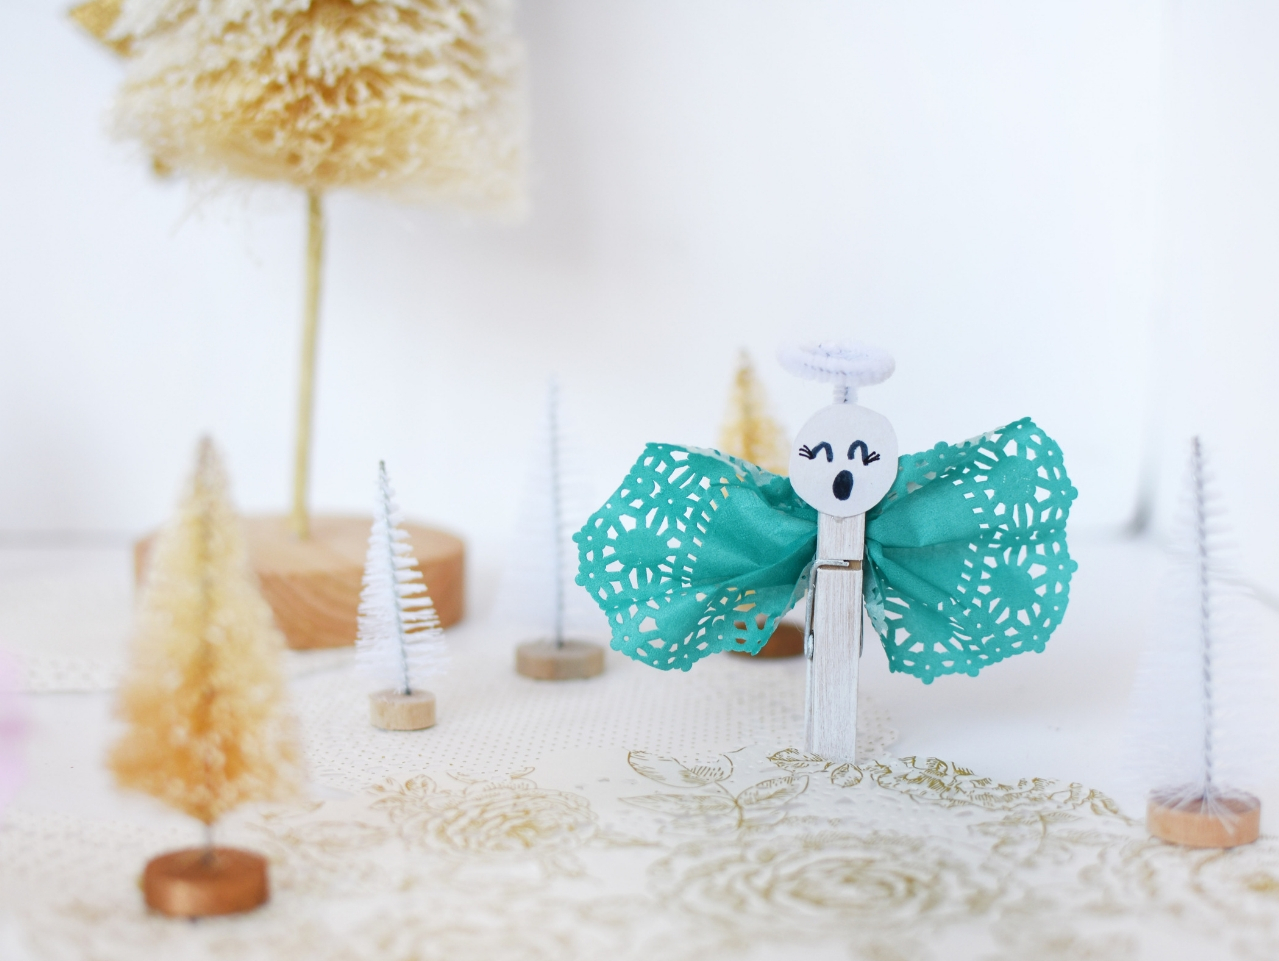 How to Make a Clothespin Angel (with Free Template) – Sustain My Craft Habit